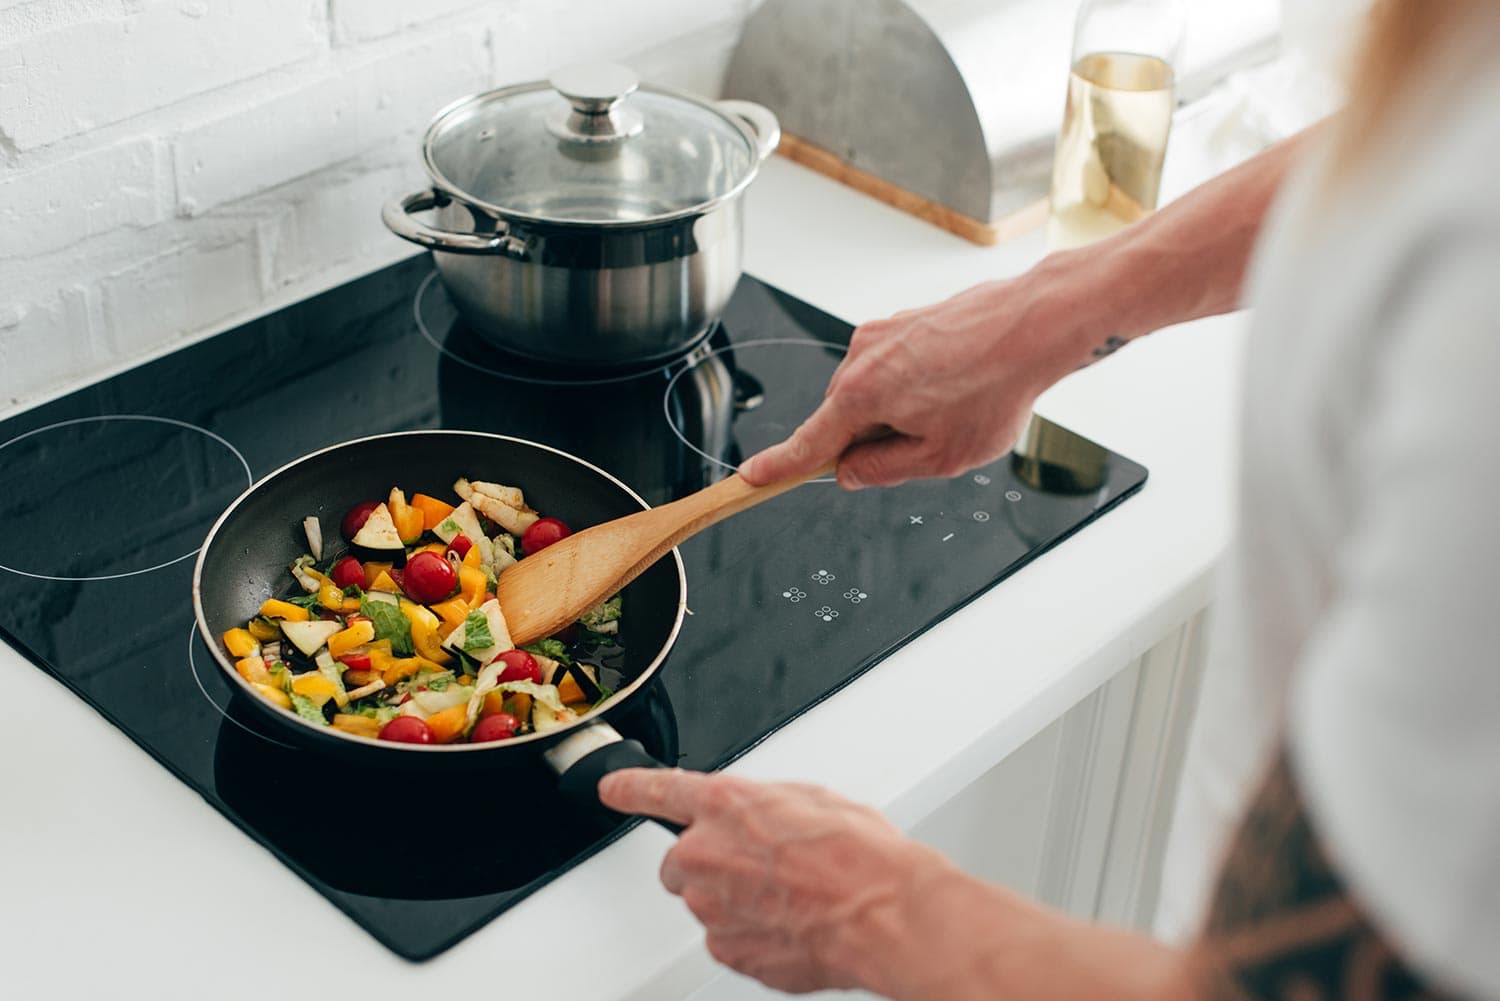 Man cooking vegetables in frying pan on electric stove